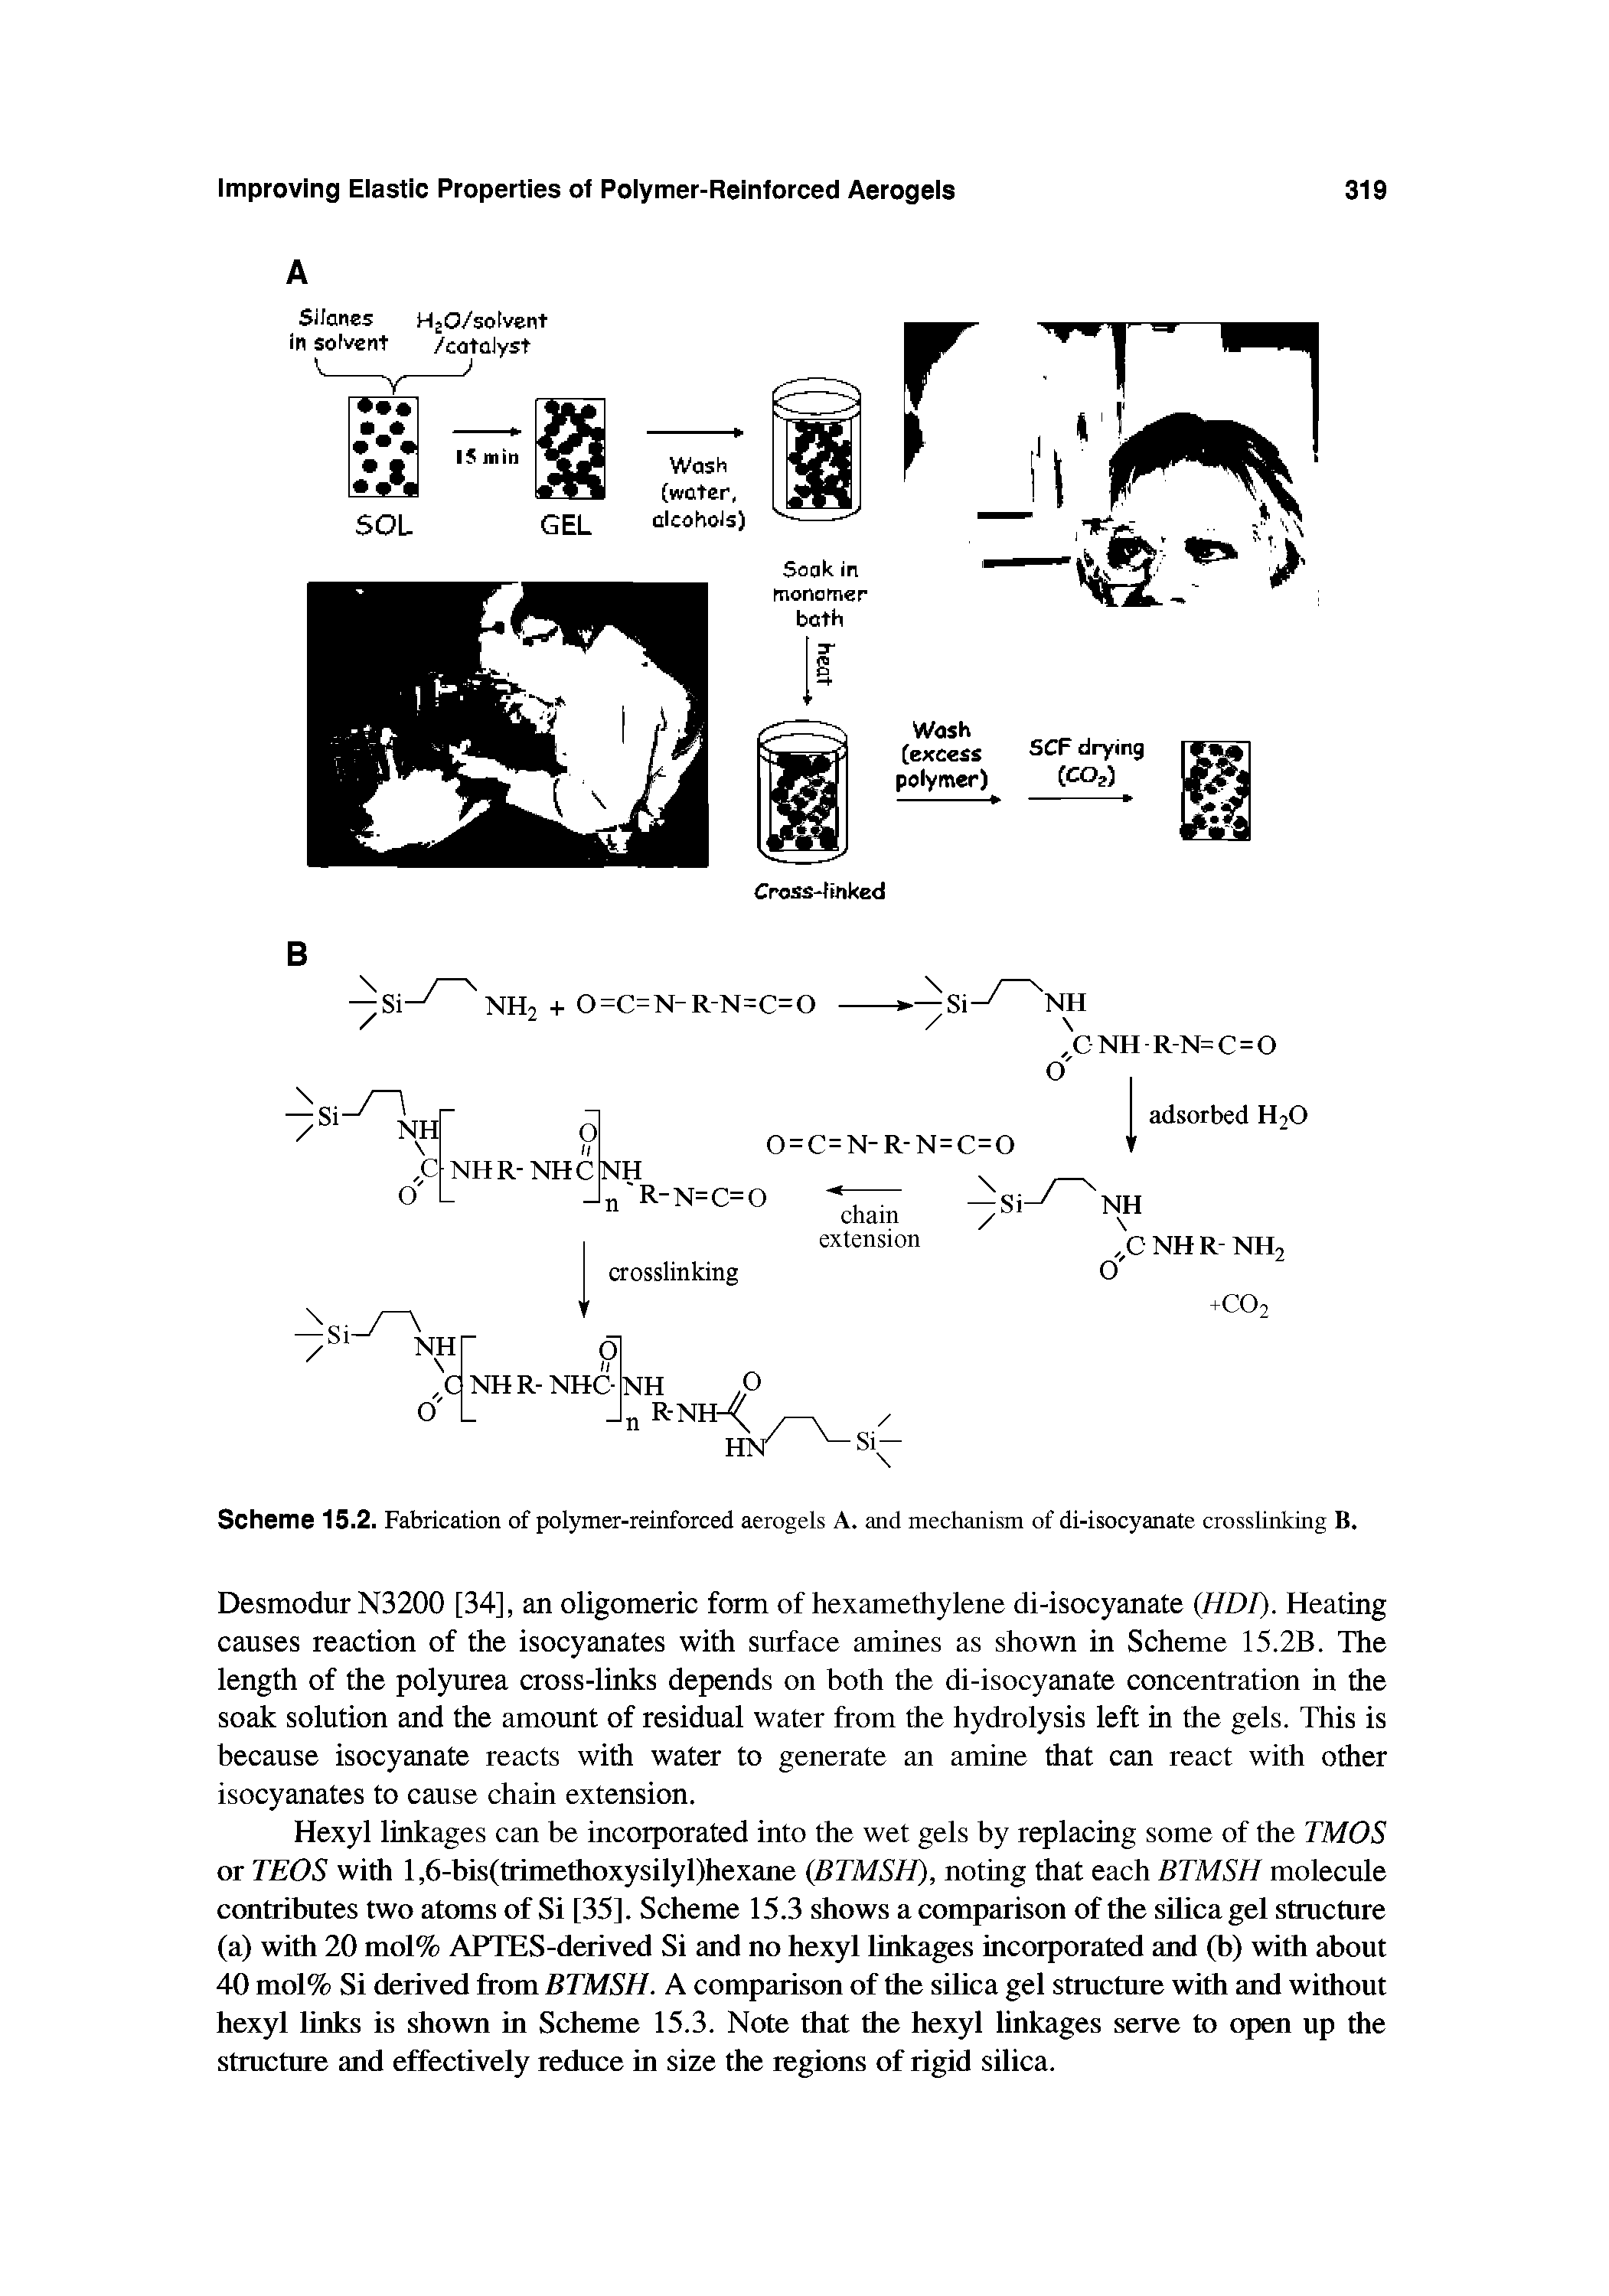 Scheme 15.2. Fabrication of polymer-reinforced aerogels A. and mechanism of di-isocyanate crossUnking B.